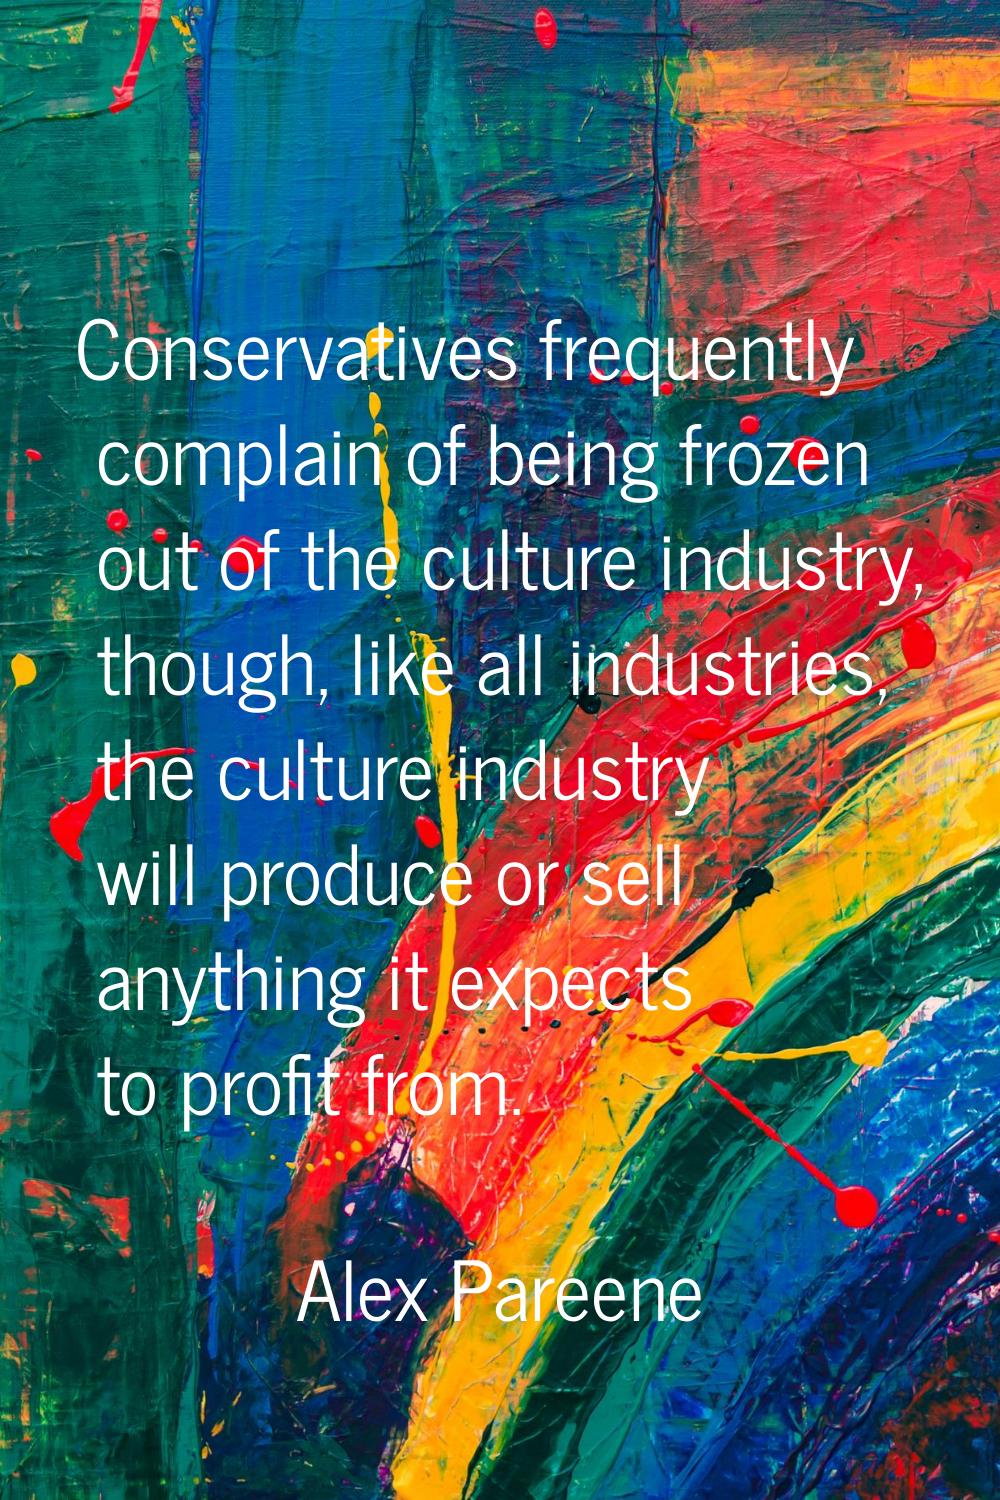 Conservatives frequently complain of being frozen out of the culture industry, though, like all ind